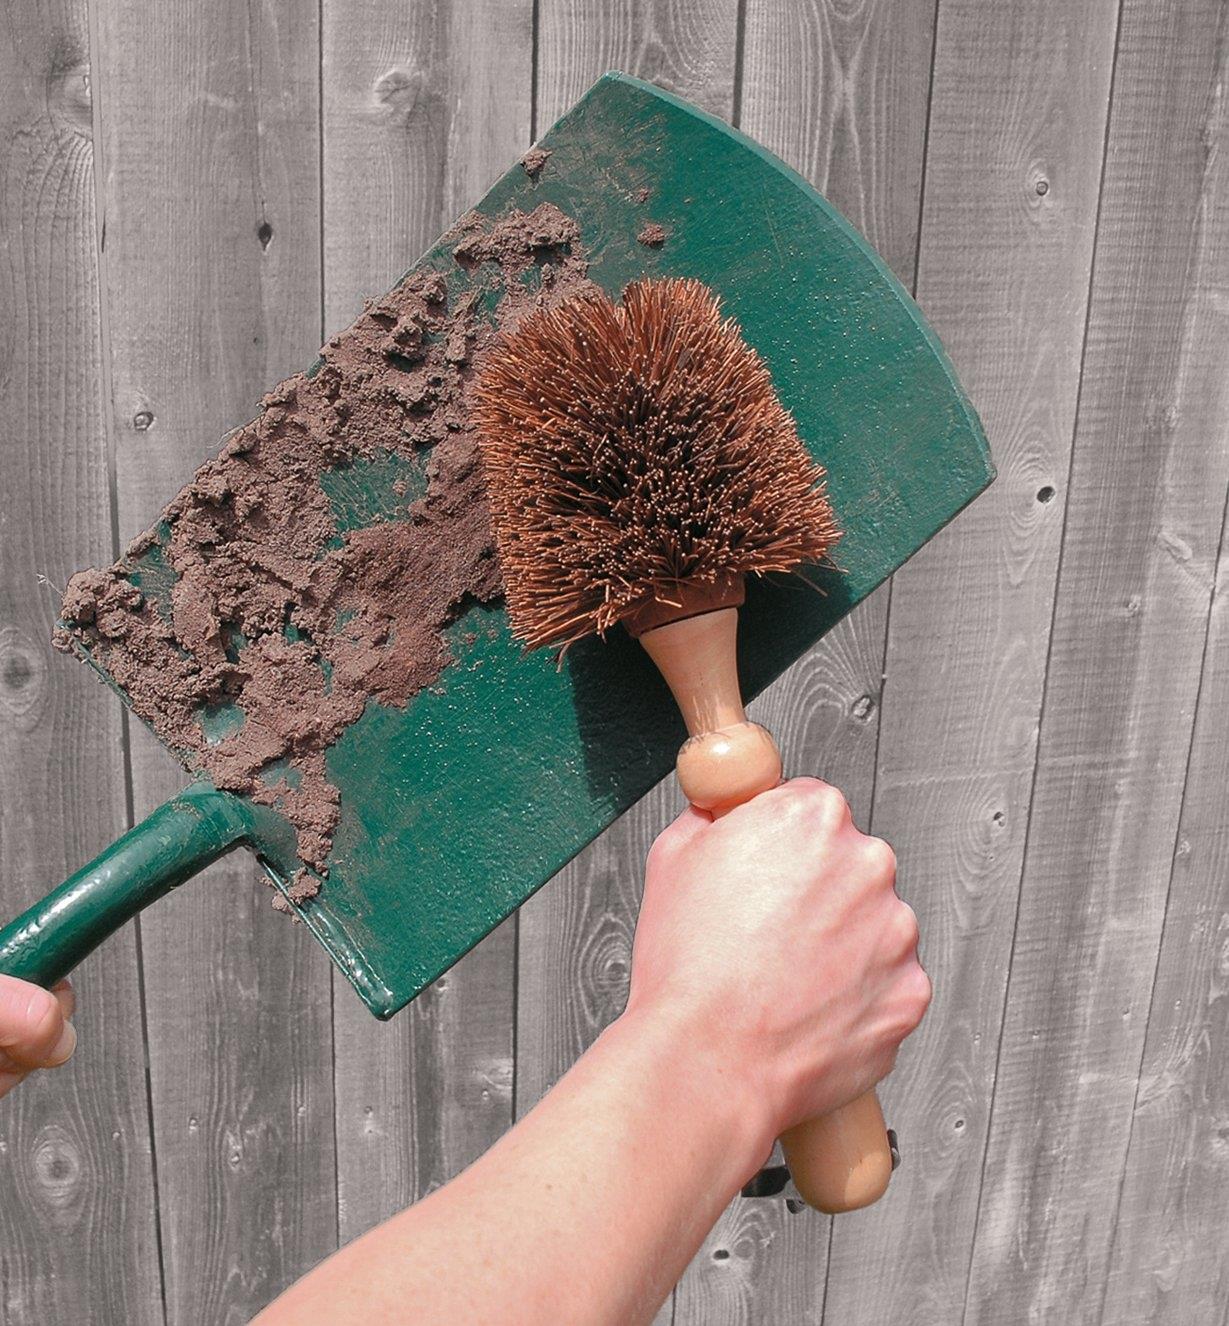 Cleaning a spade with the Heavy-Duty Brush